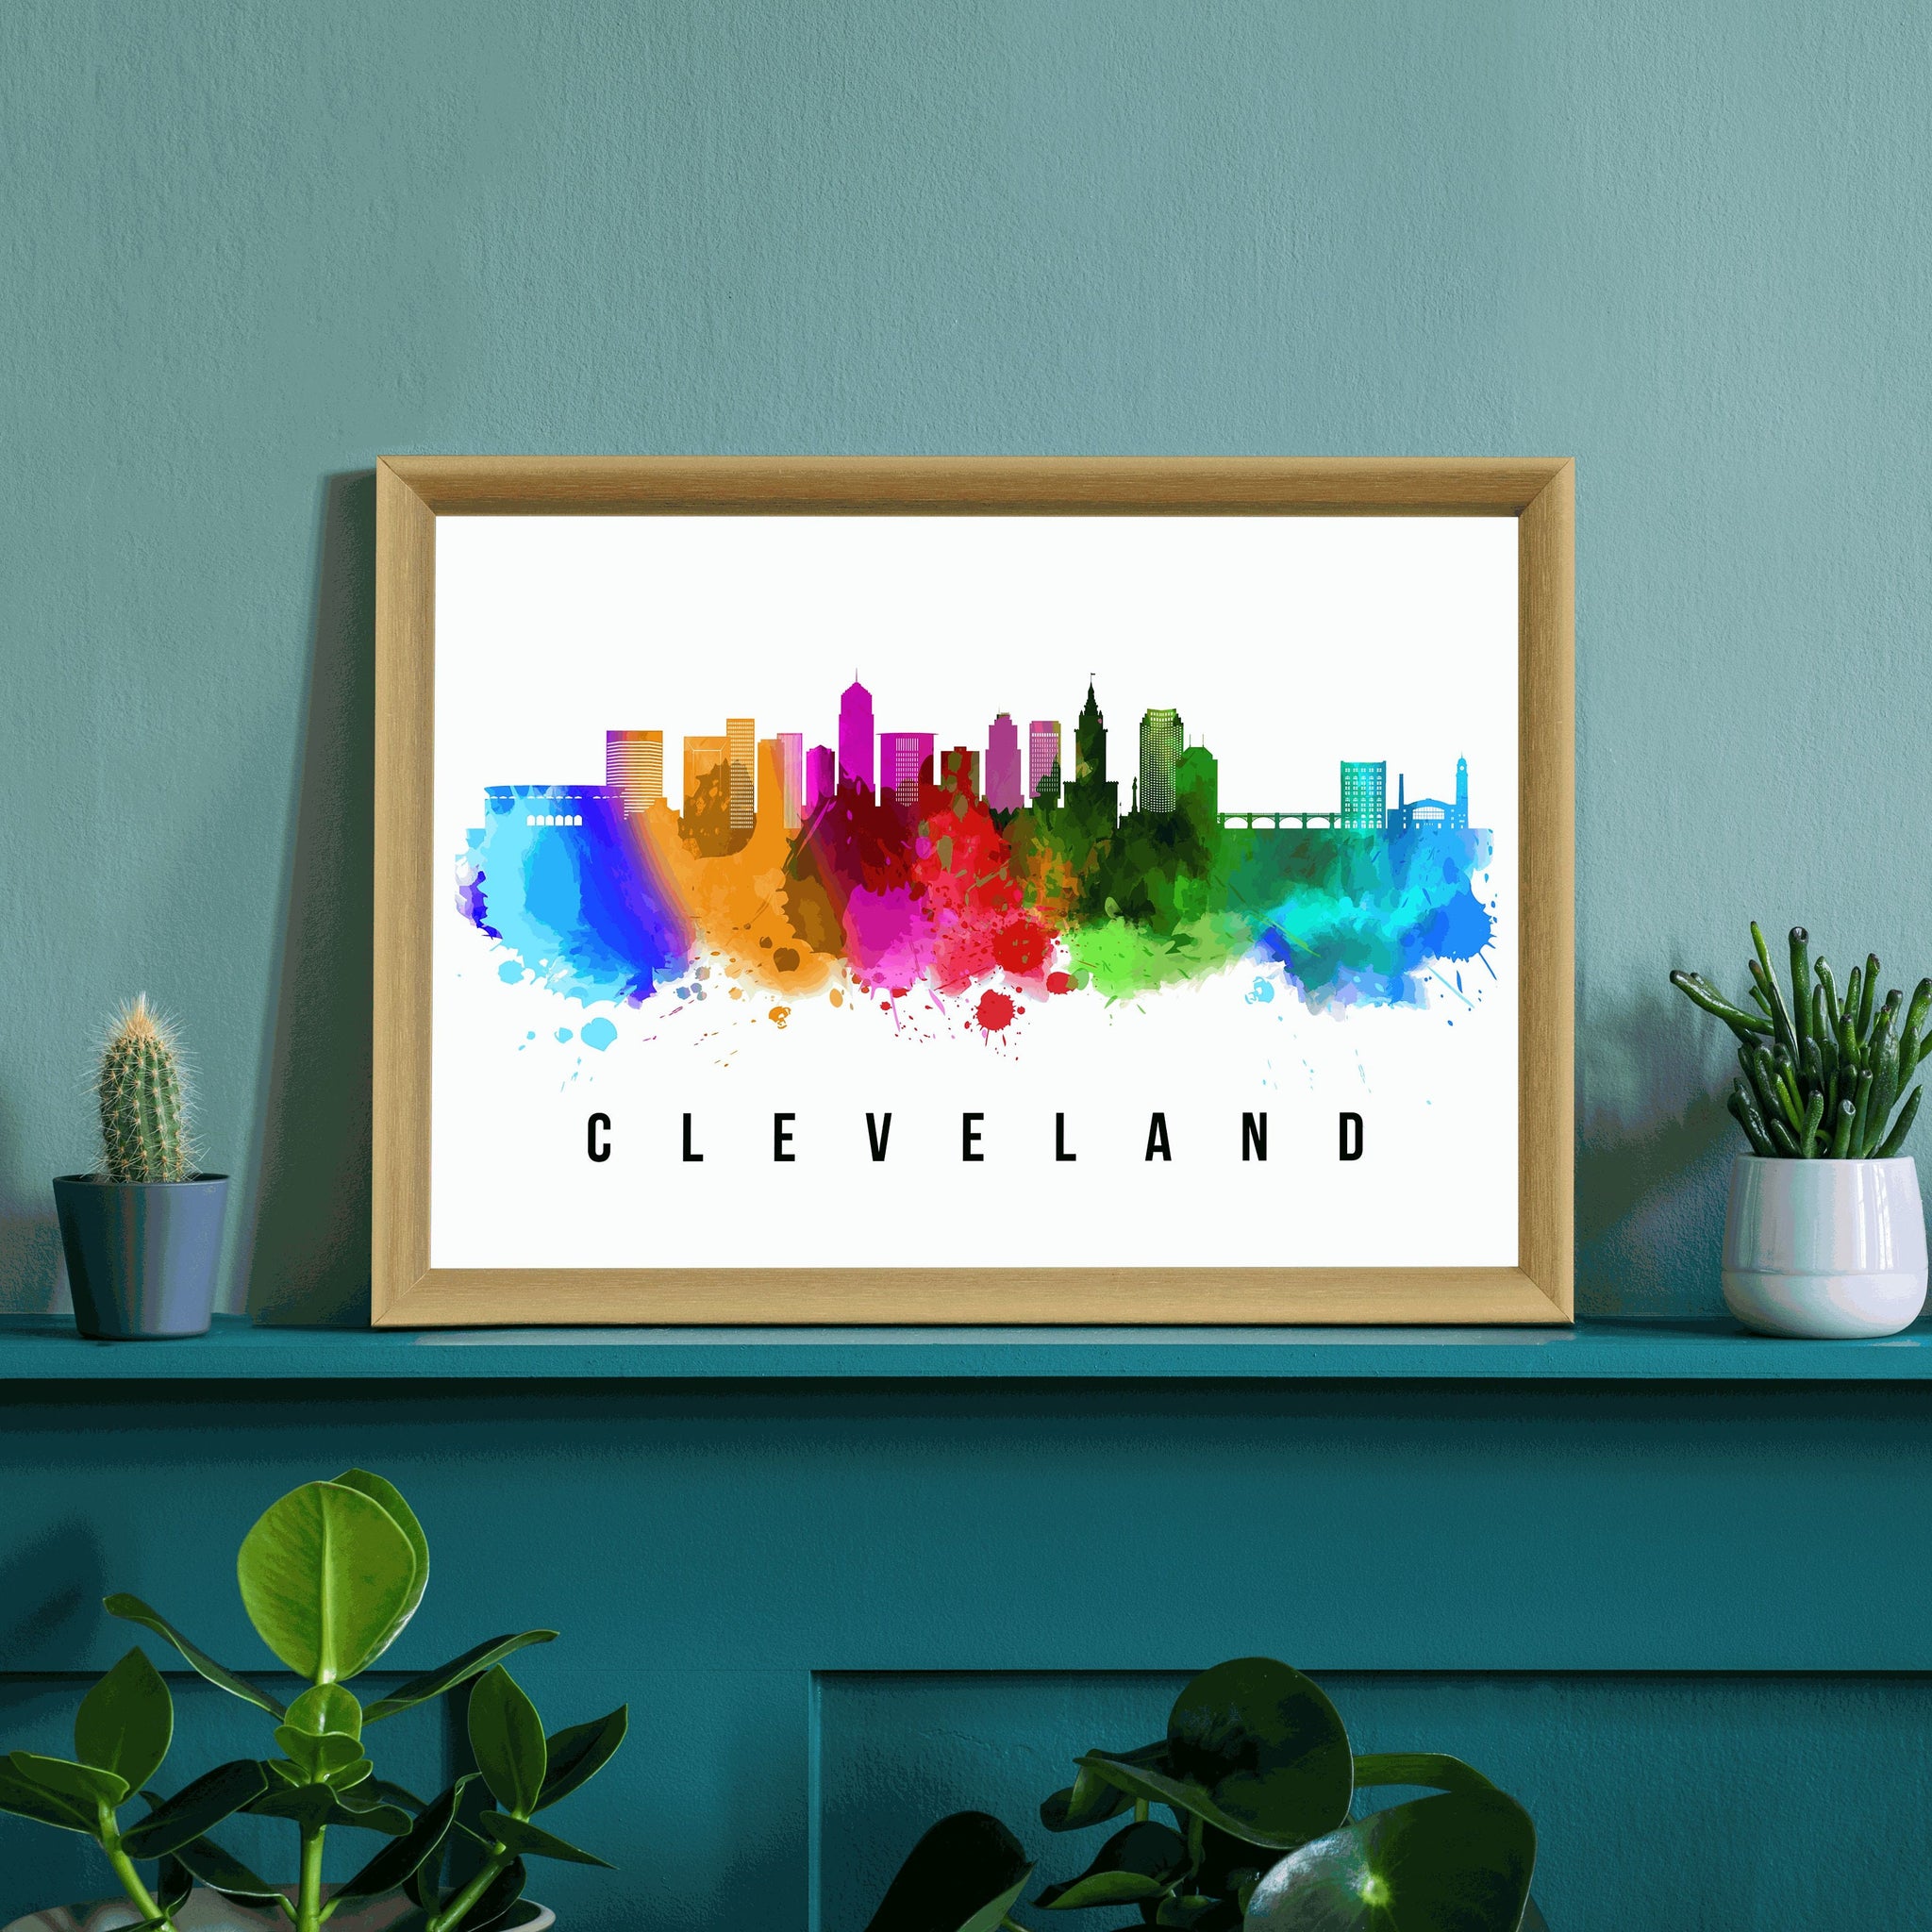 Cleveland - Ohio Skyline Poster, Cleveland Cityscape Painting, Cleveland - Ohio Landmark and Cityscape Print, Home and Office Wall Art